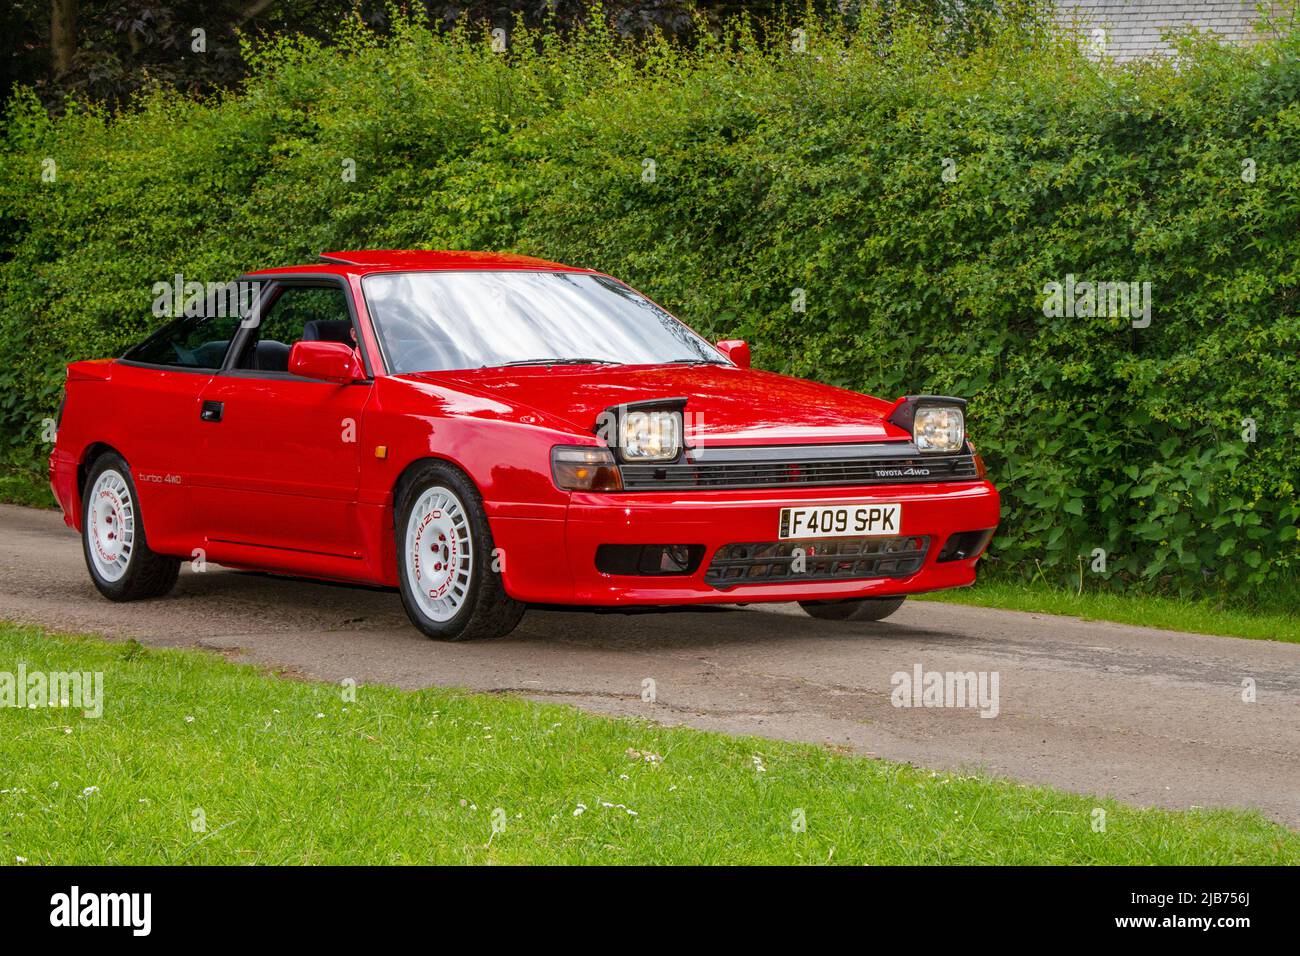 1989 TOYOTA four wheel drive, 1998 cc petrol sports coupe with flip up Headlights, arriving in Worden Park Motor Village for the Leyland Festival, UK Stock Photo